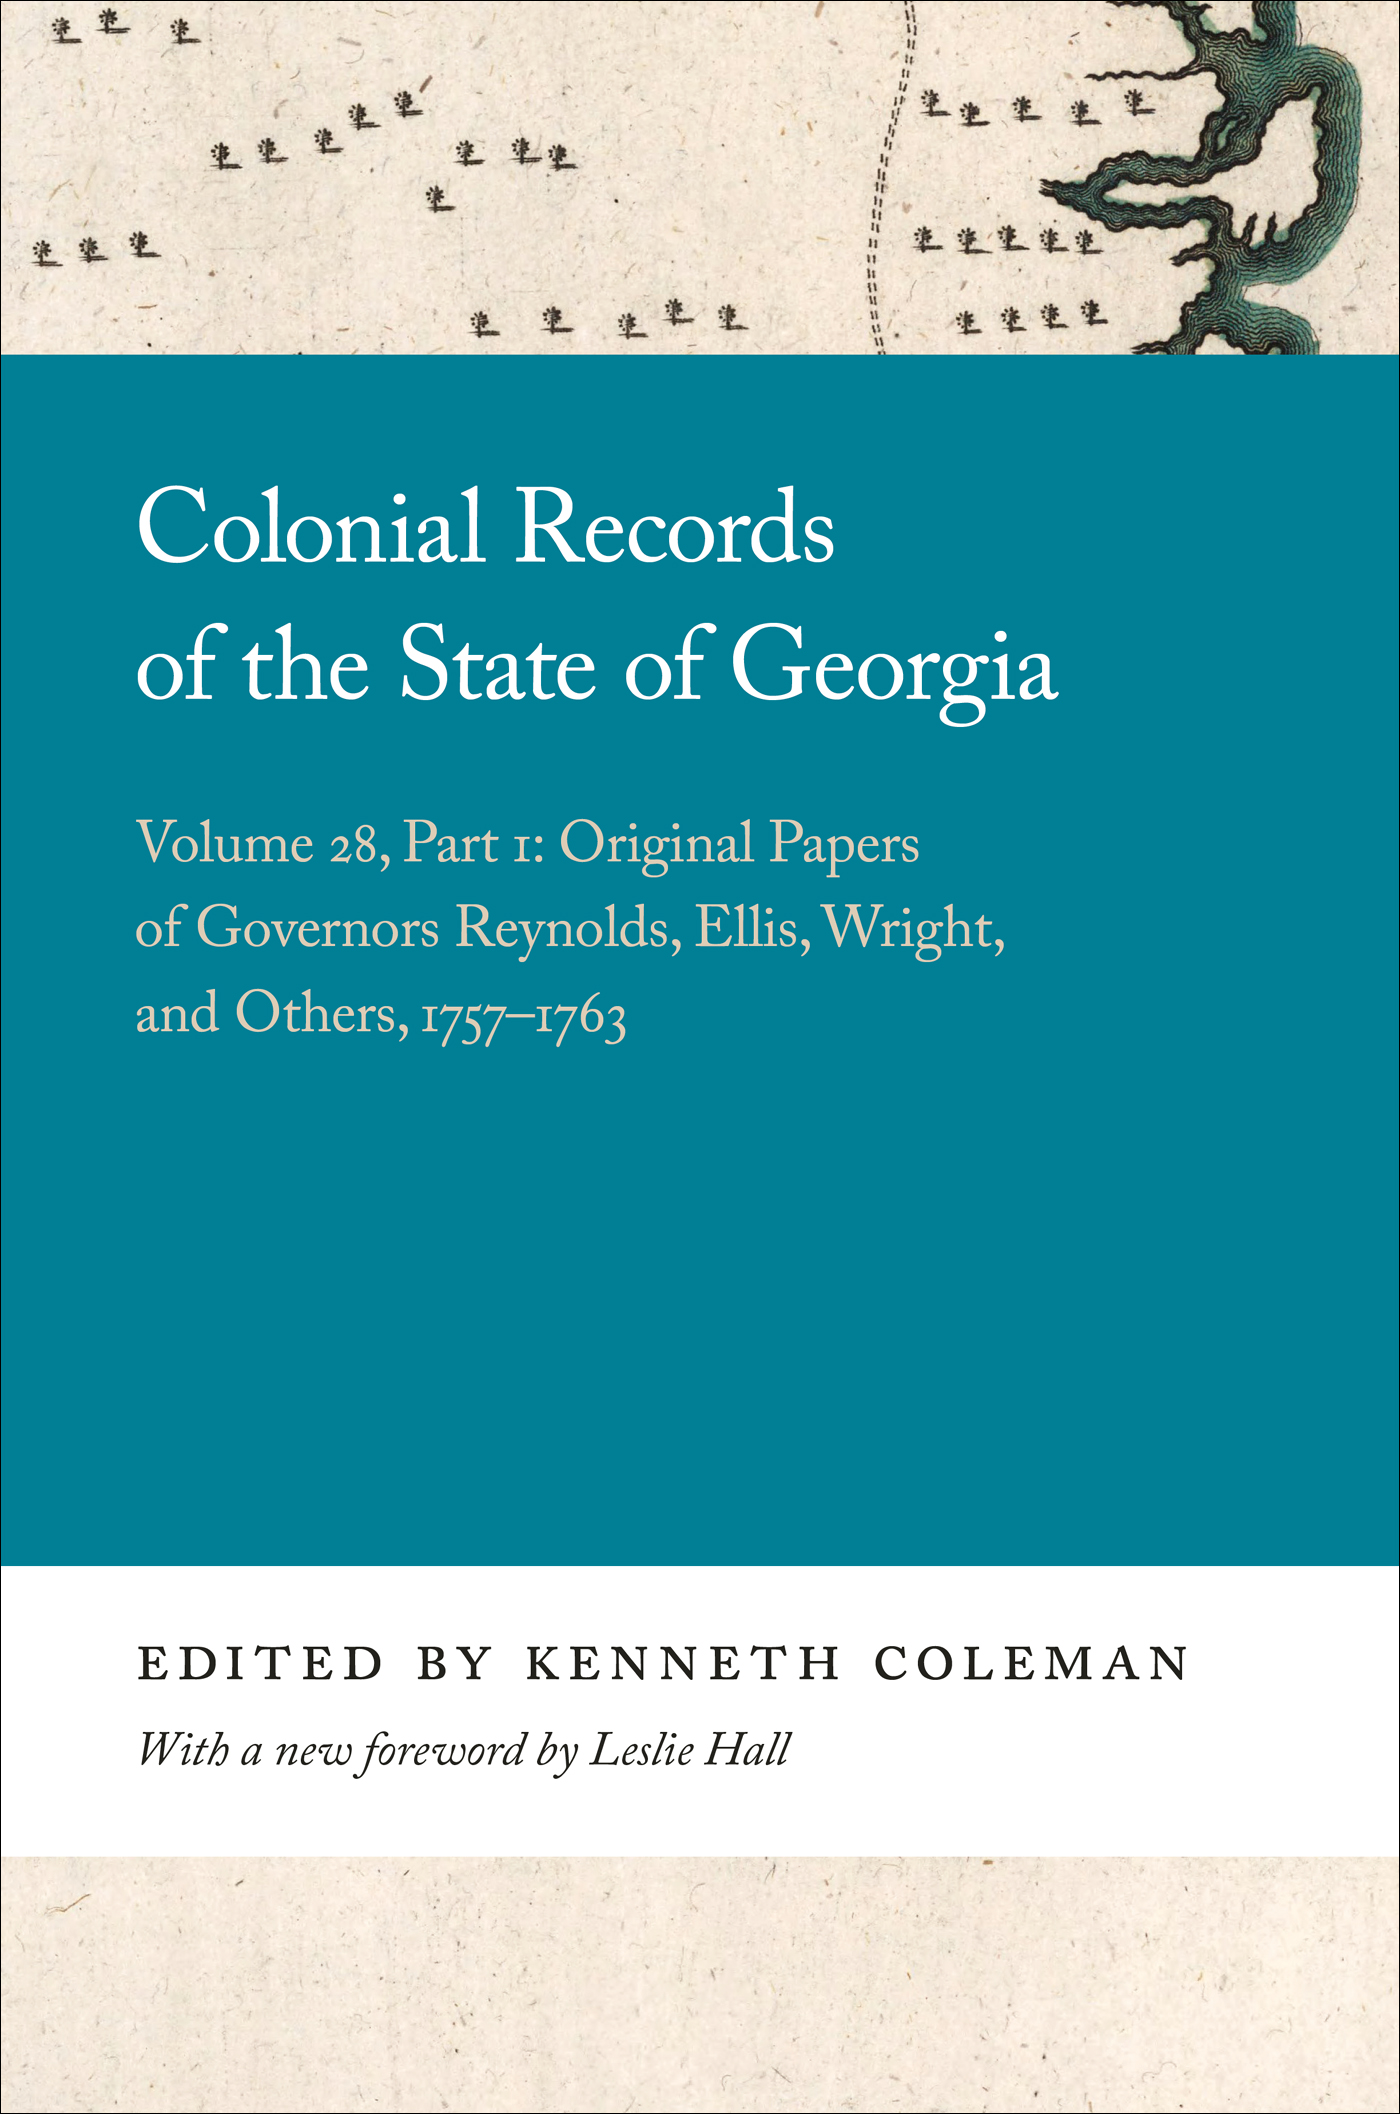 Cover page of the book “Colonial Records of the State of Georgia.”